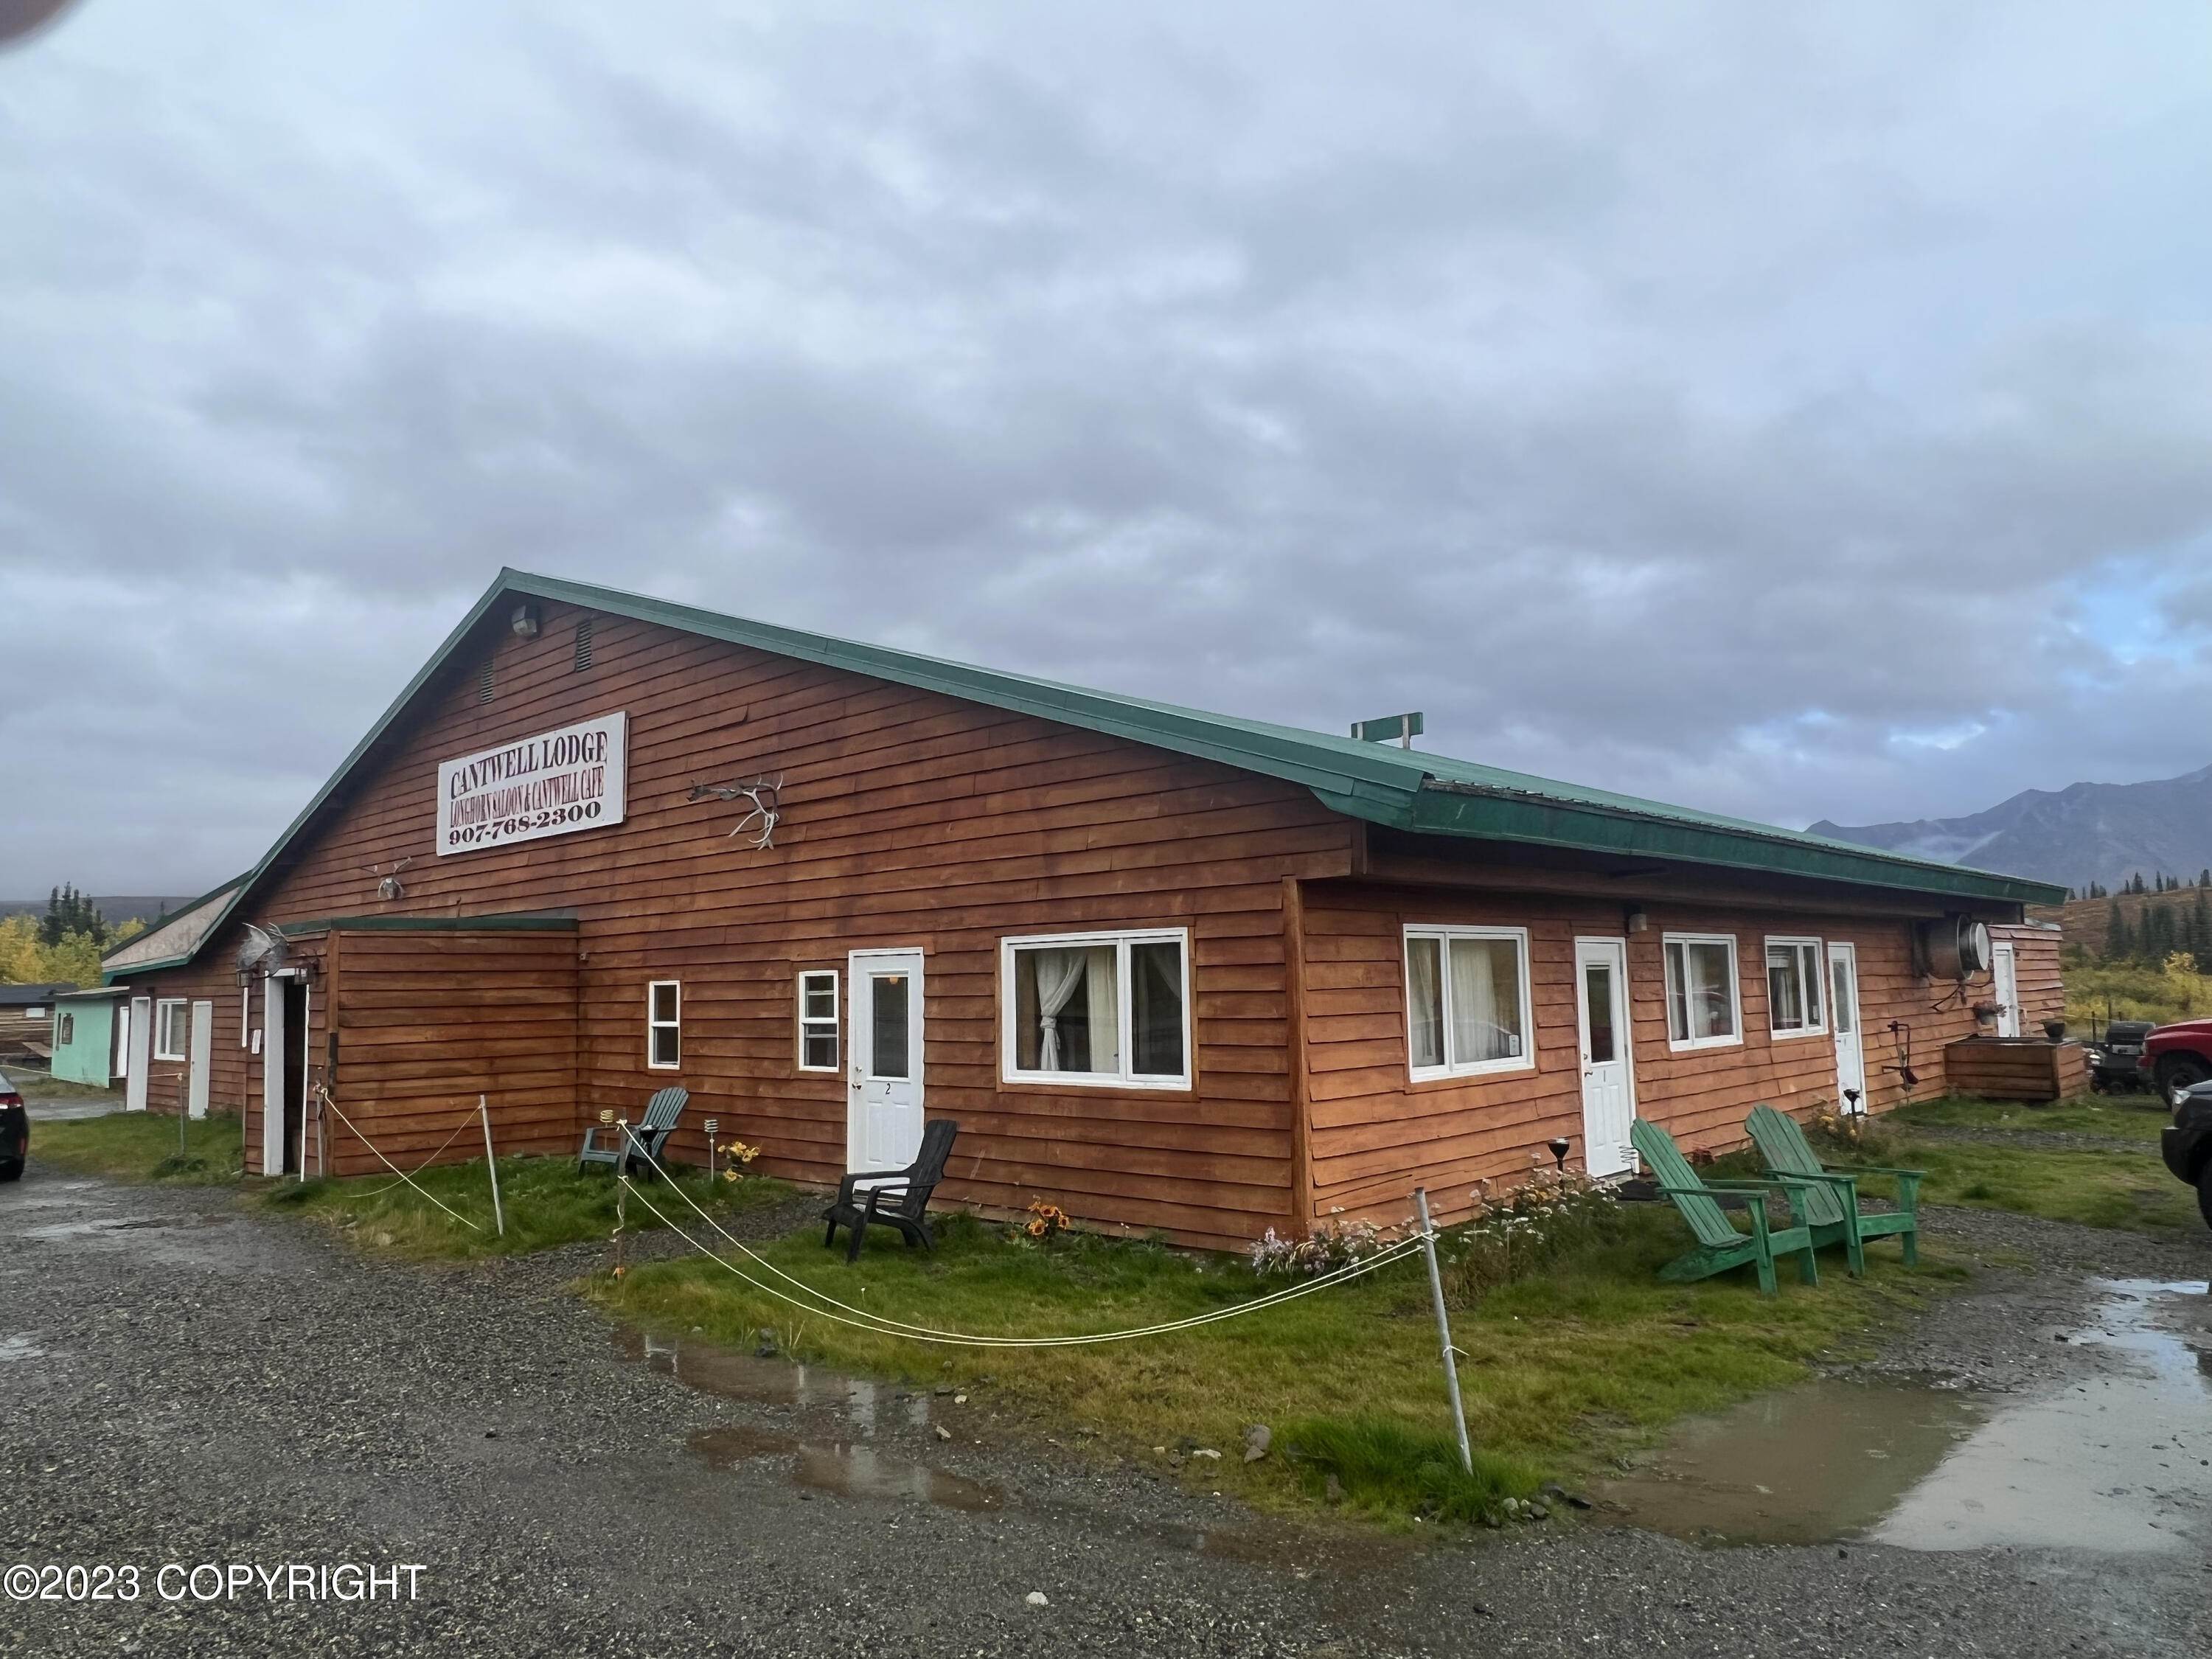 Business Opportunity for Sale at Mile 136 Denali Highway Cantwell, Alaska 99729 United States